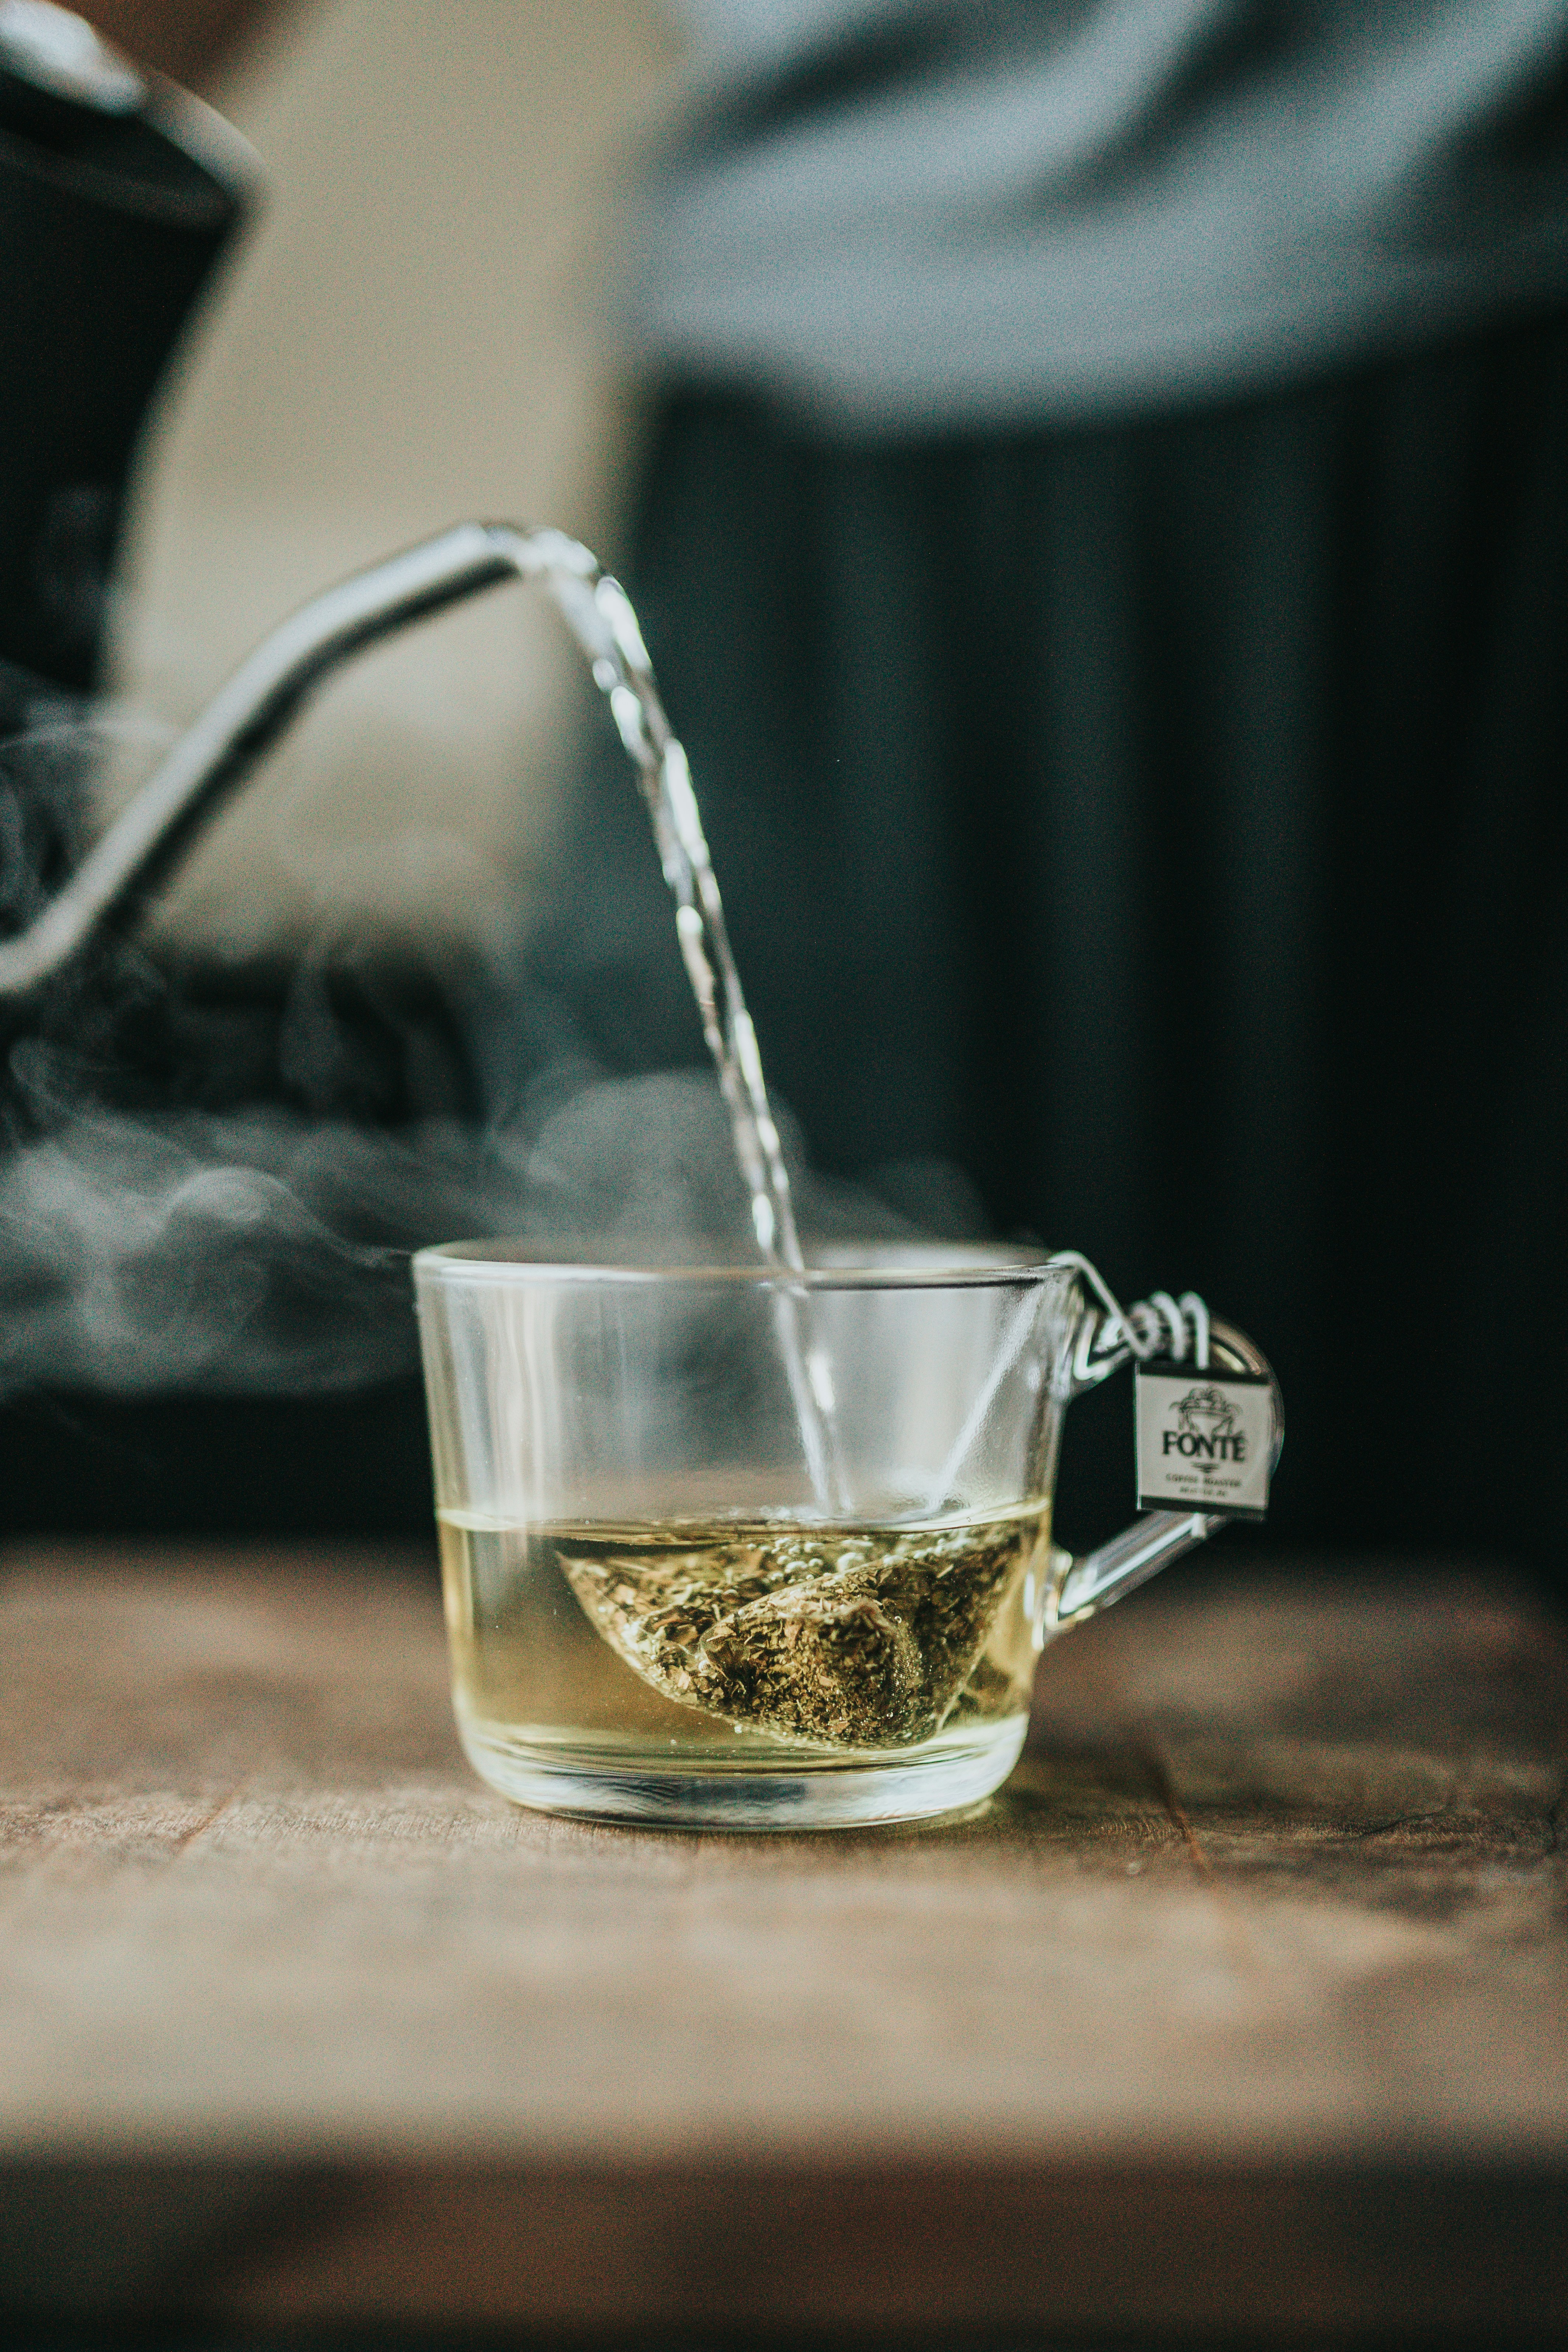 Does Green Tea Have Anti-inflammatory Properties And Can It Help With Conditions Like Arthritis?